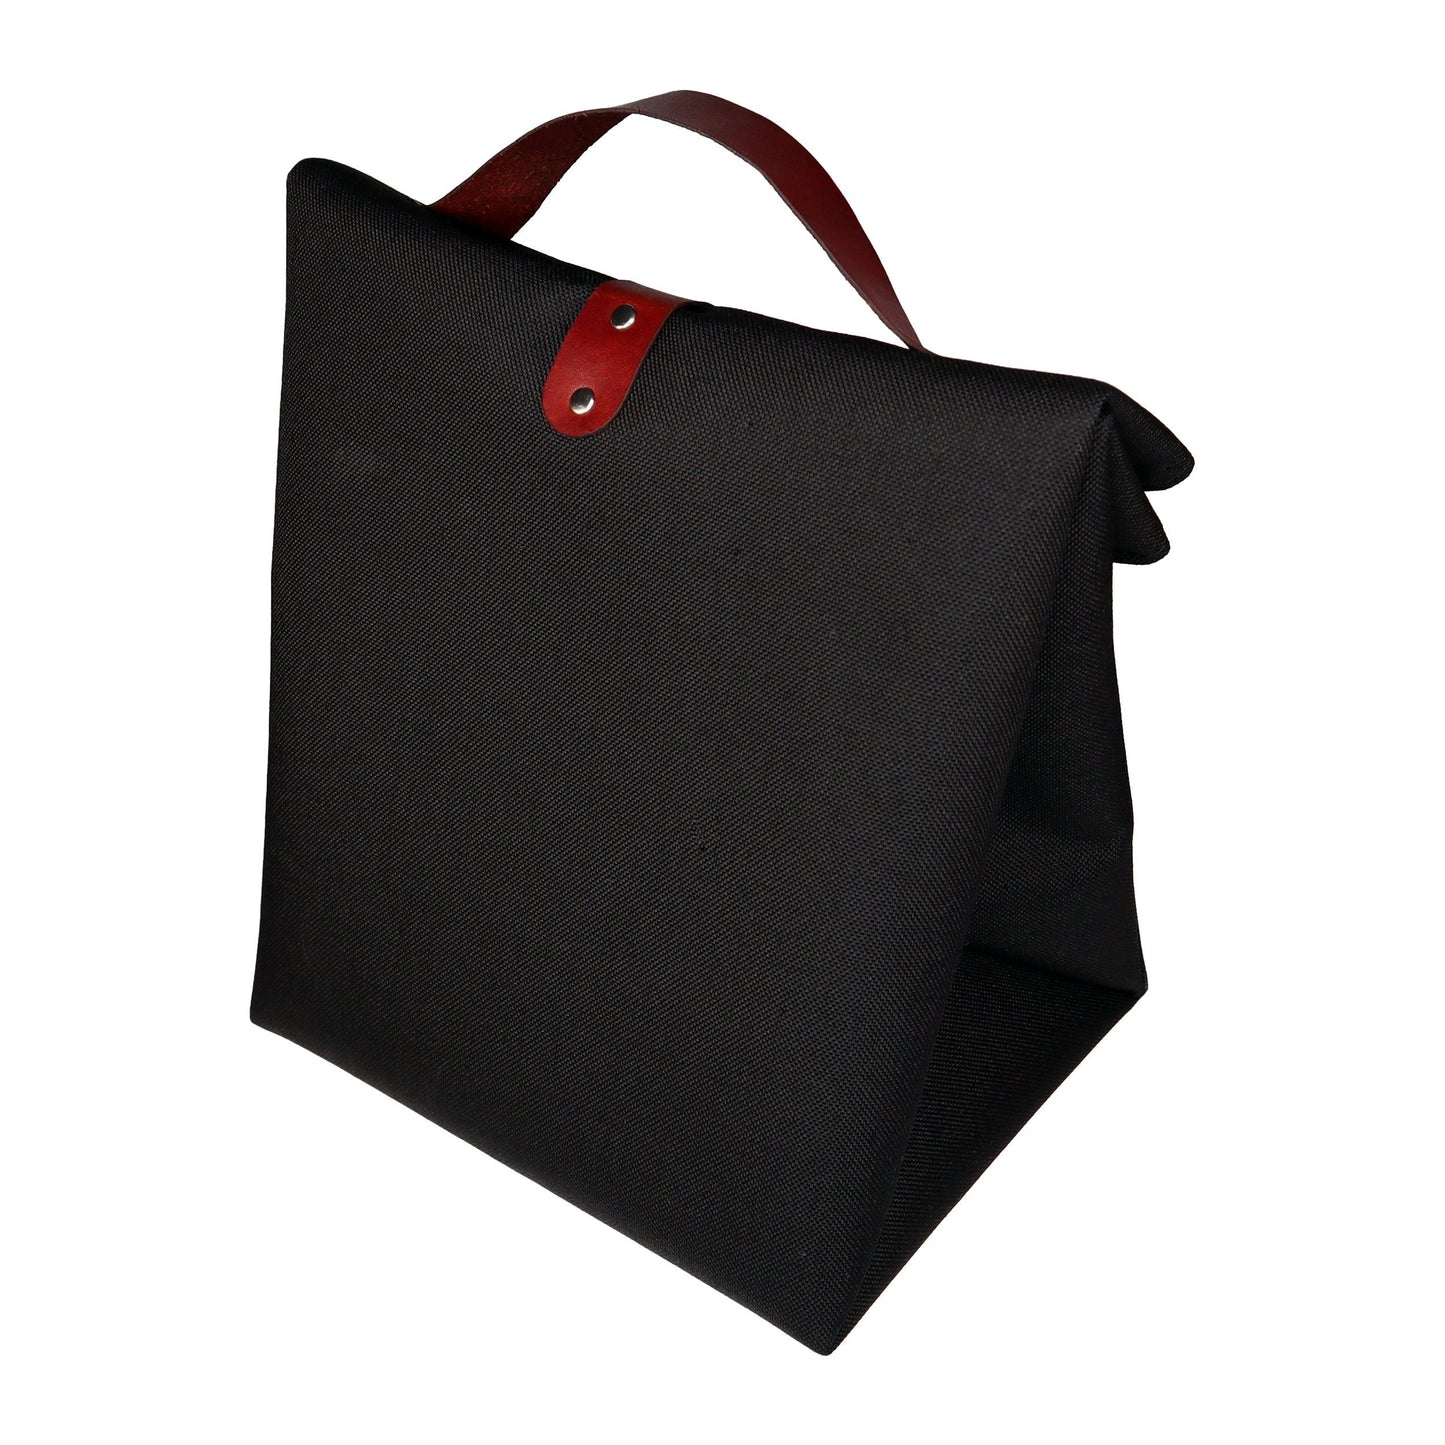 Black Canvas & Leather Fold Top Lunch Bag